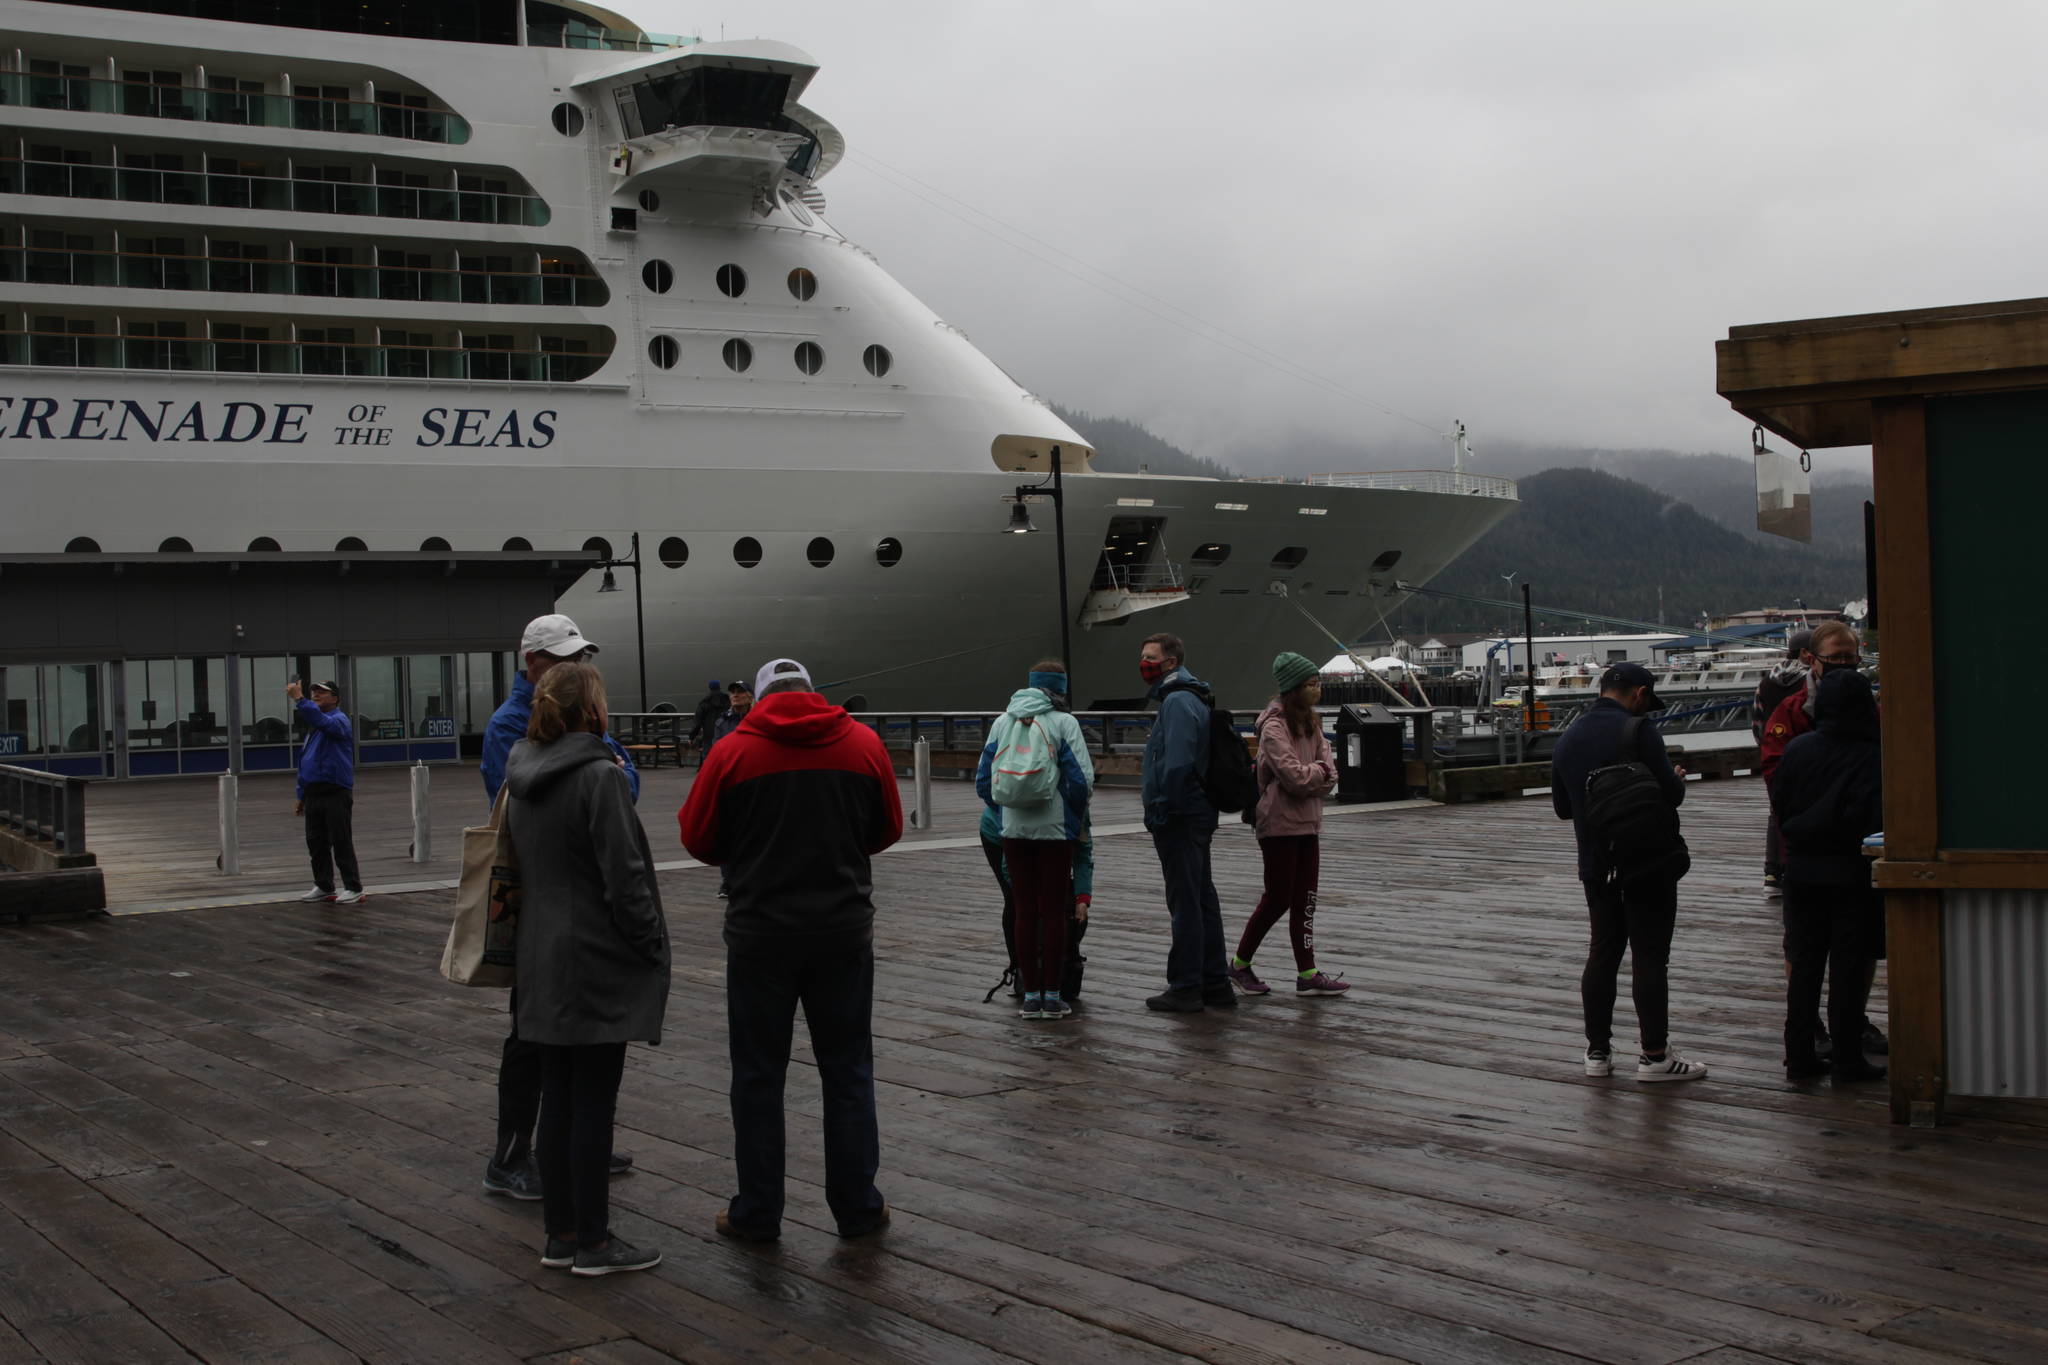 Tourists congregate in front of the Serenade of the Seas, seen here moored downtown, on Friday morning. The Royal Caribbean cruise ship is the first large cruise ship to come to Juneau since the pandemic caused the cancellation of the 2020 cruise ship season and delayed the 2021 season. (Michael S. Lockett / Juneau Empire)